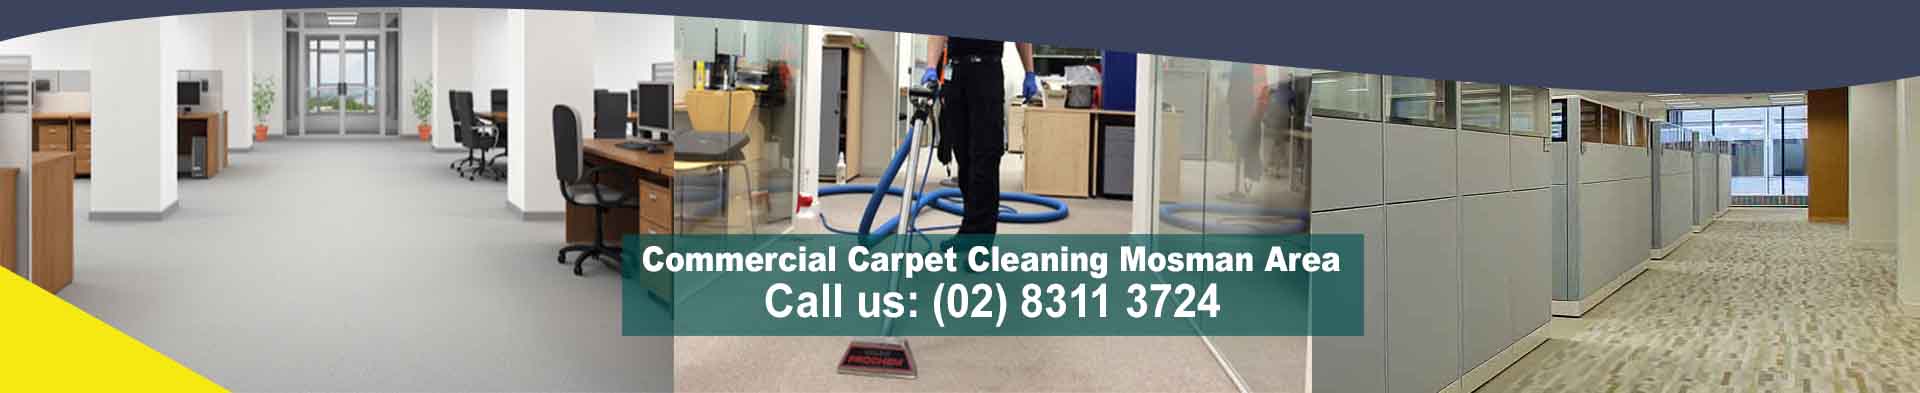 Commercial Carpet Cleaning Mosman Area